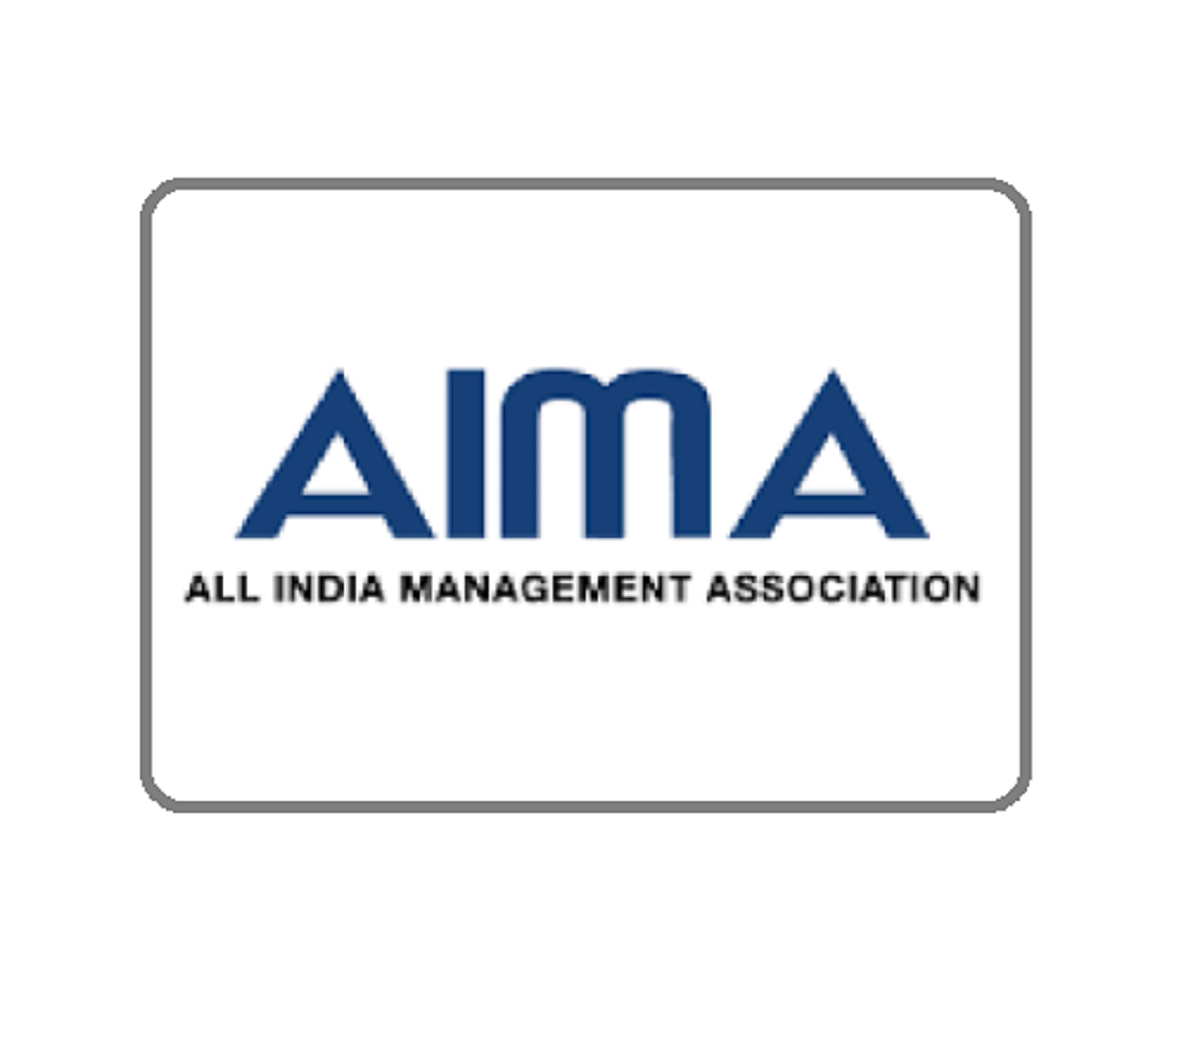 AIMA MAT 2020 Result for December Session Announced, Check Here